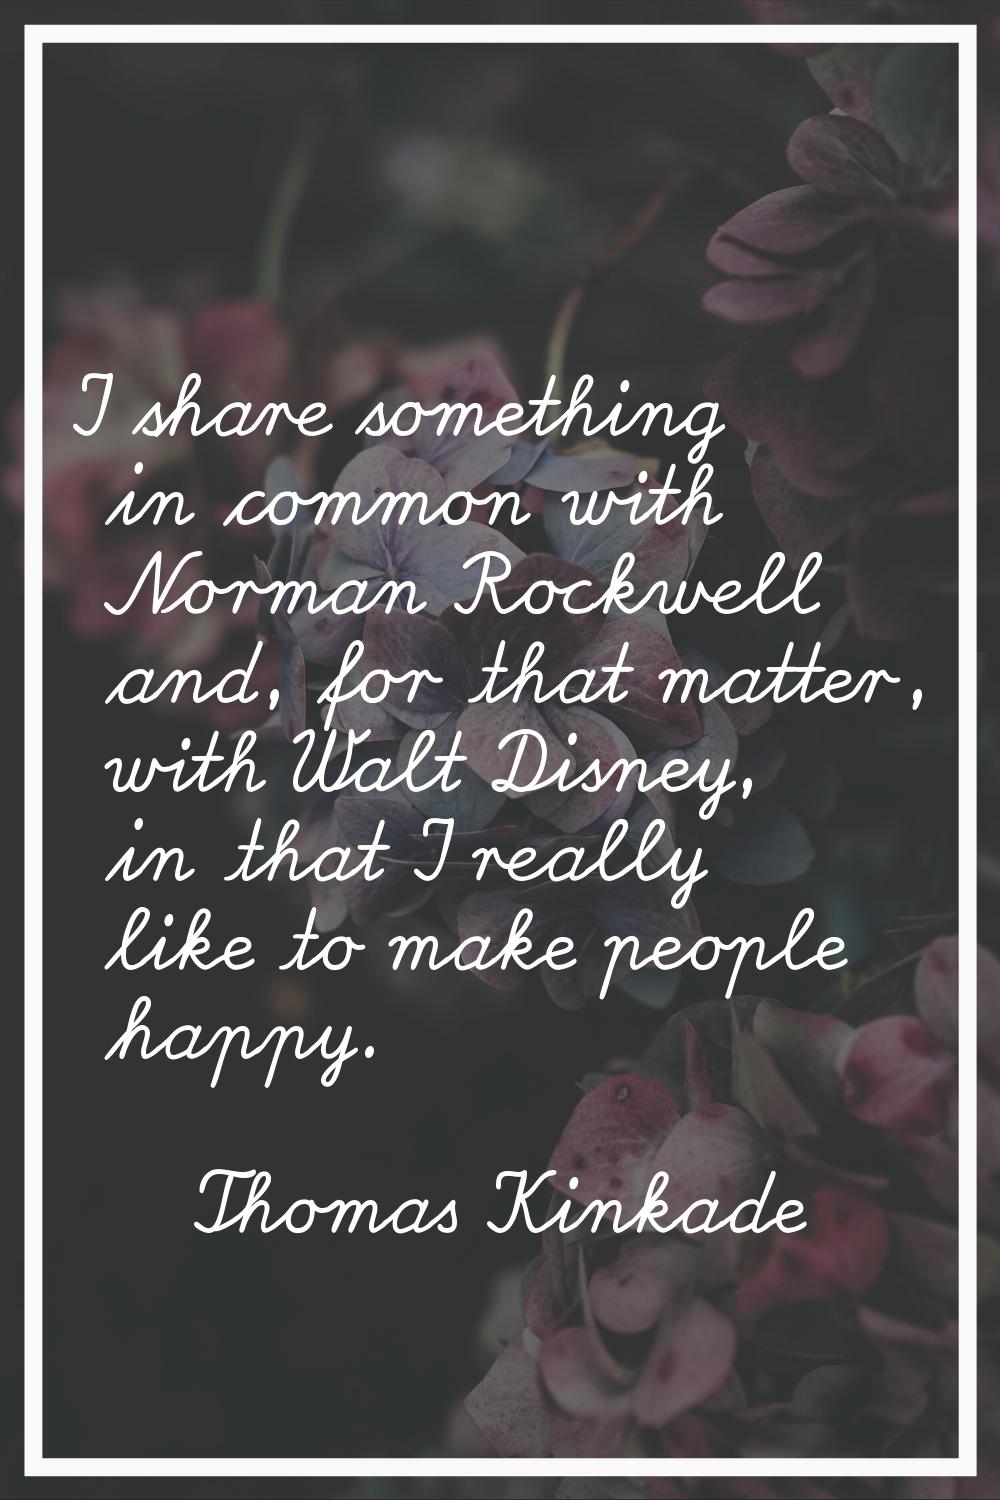 I share something in common with Norman Rockwell and, for that matter, with Walt Disney, in that I 